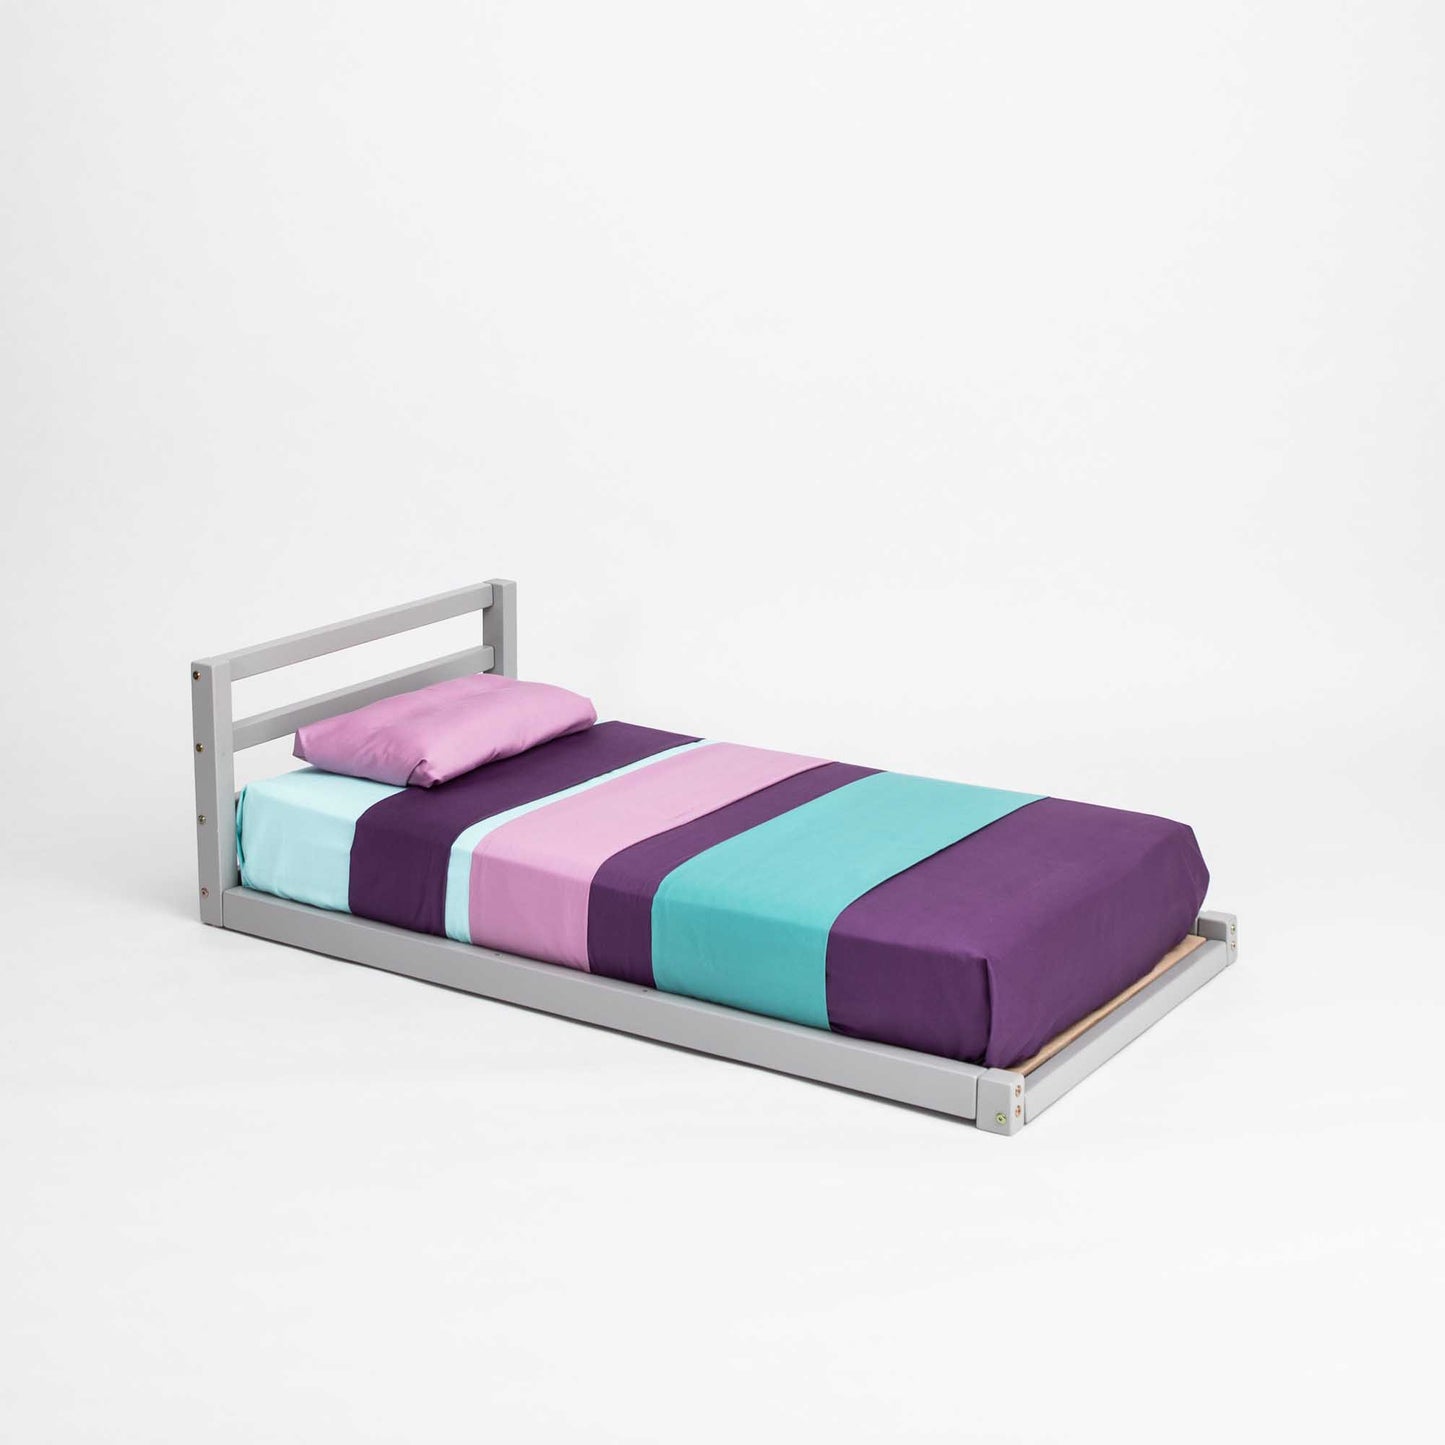 Toddler floor bed with a horizontal rail headboard